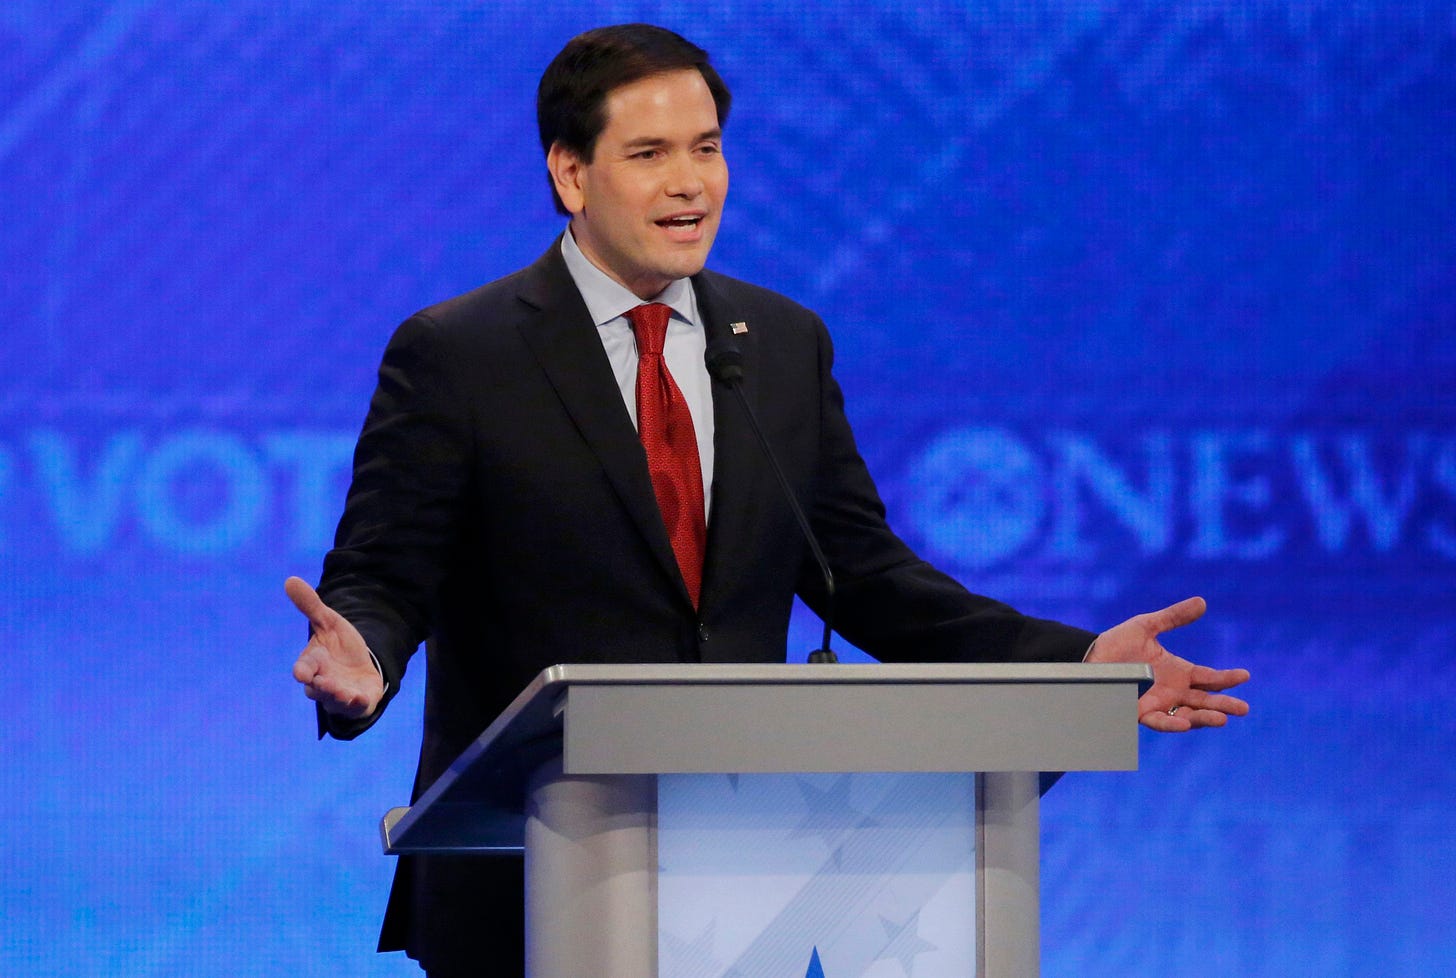 Before New Hampshire, Marco Rubio is knocked off his game - CBS News